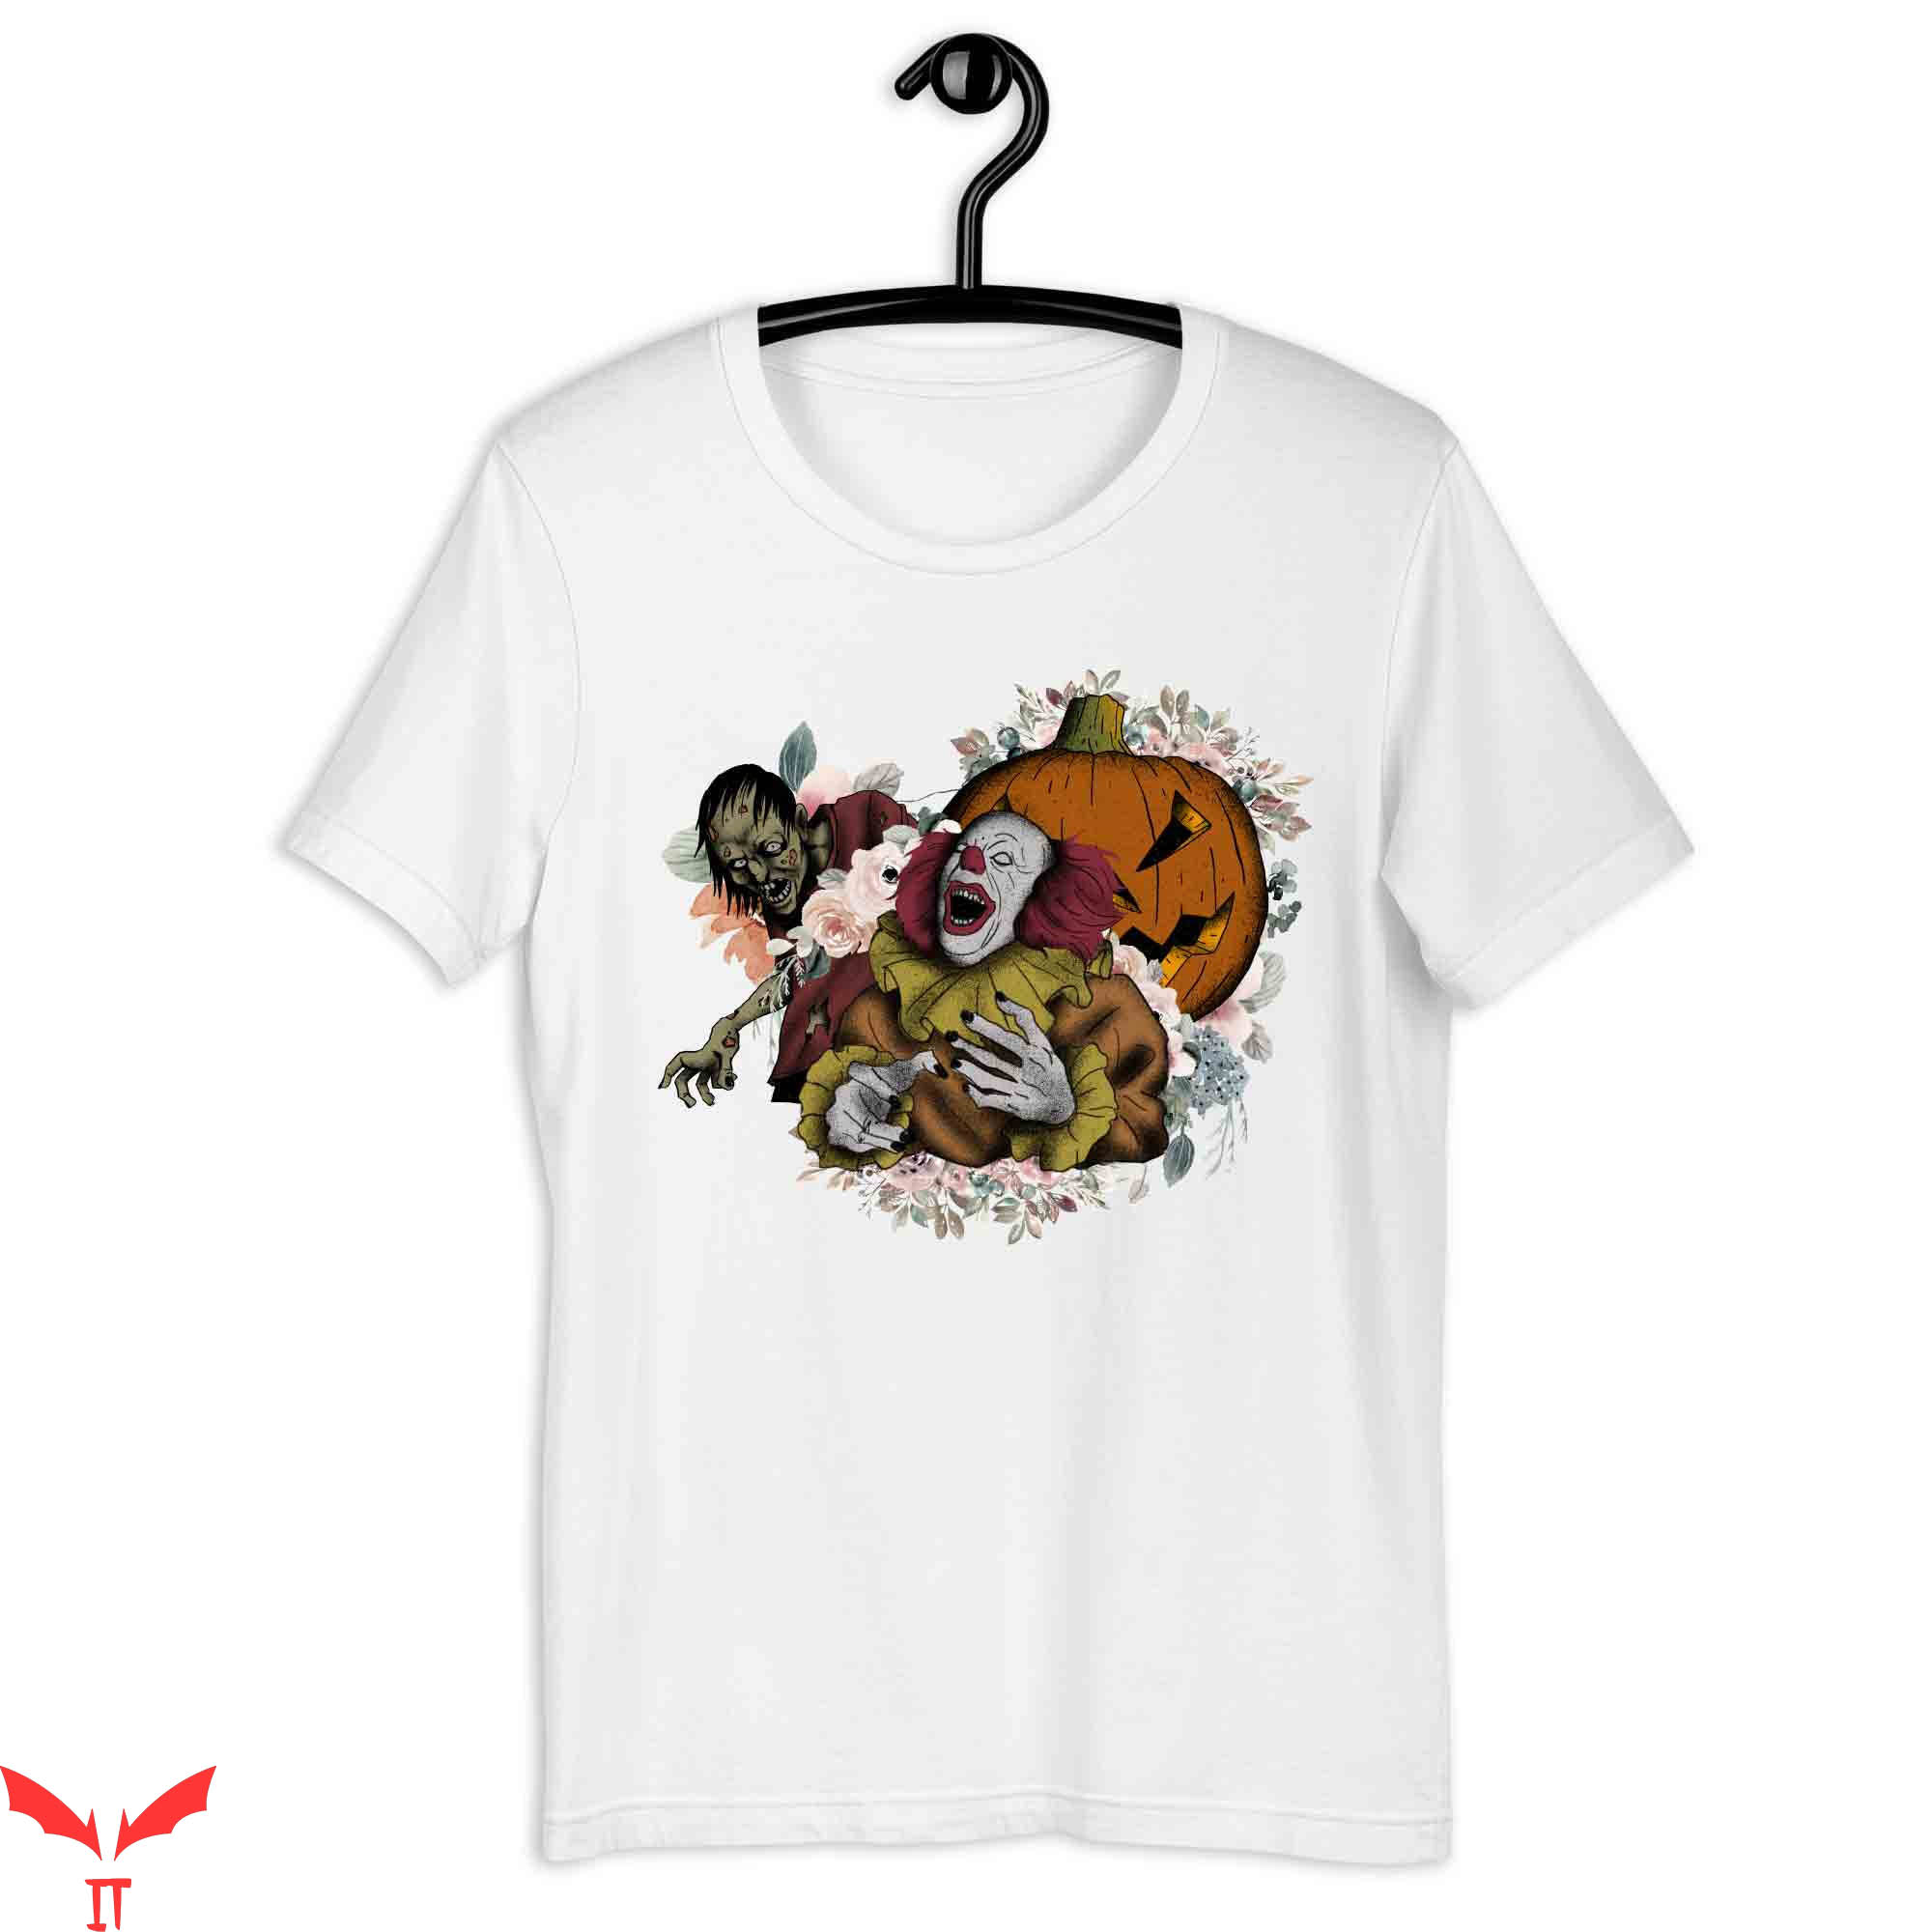 IT T-Shirt Pennywise Halloween Floral Horror IT The Movie